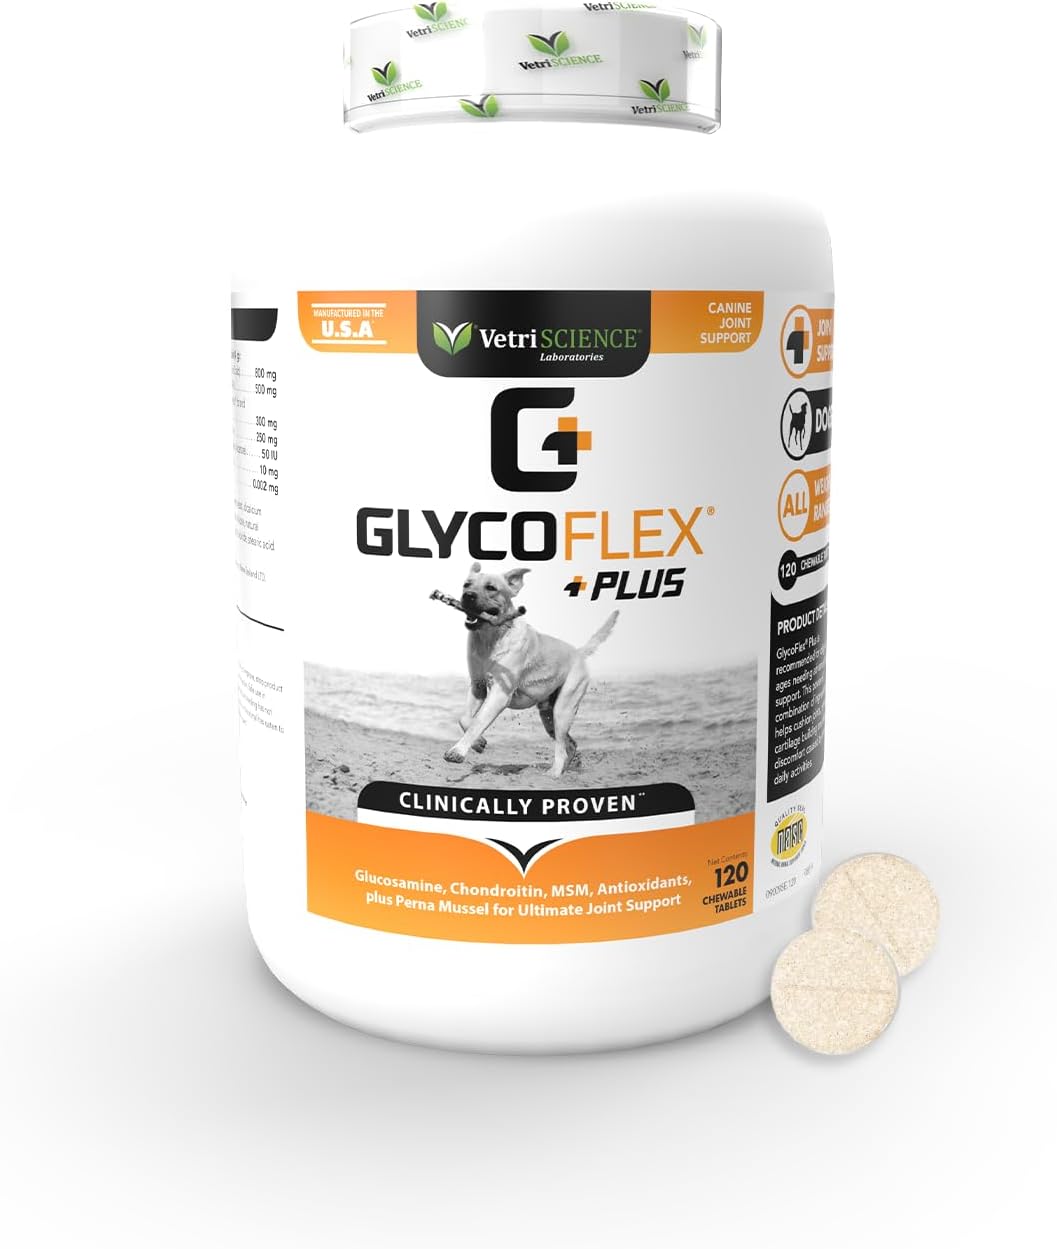 VETRISCIENCE Glycoflex Plus, Clinically Proven Hip and Joint Supplement for Dogs - Advanced Dog Supplement with Glucosamine, Chondroitin, MSM, Green Lipped Mussel & DMG - 120 Tablets, Chicken Flavor?